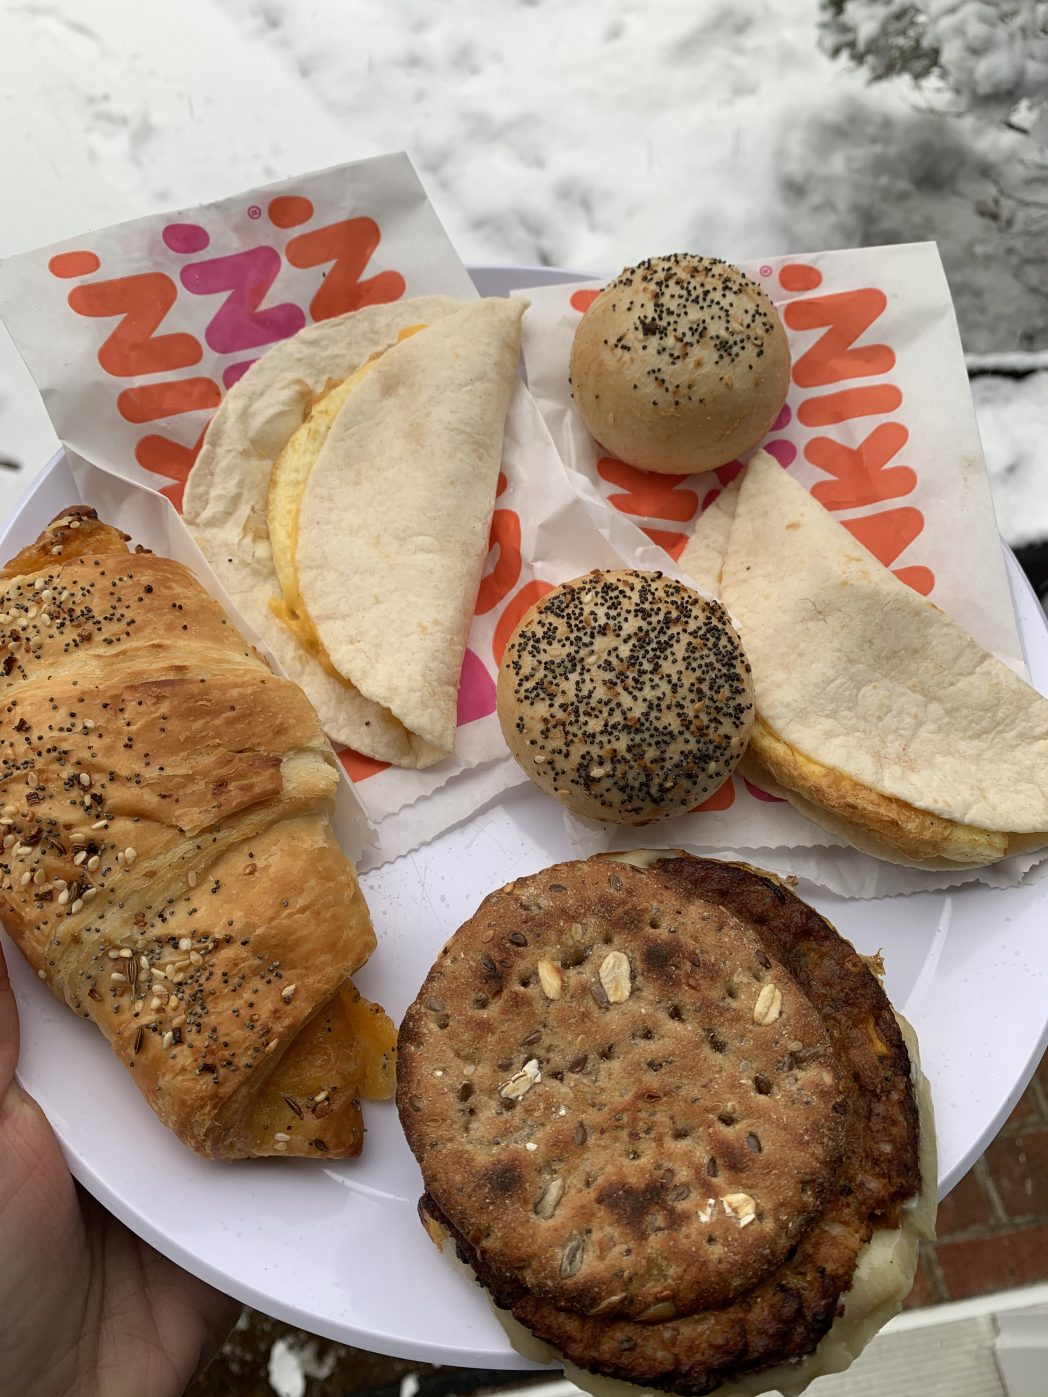 Great Snacking Options at Dunkin’